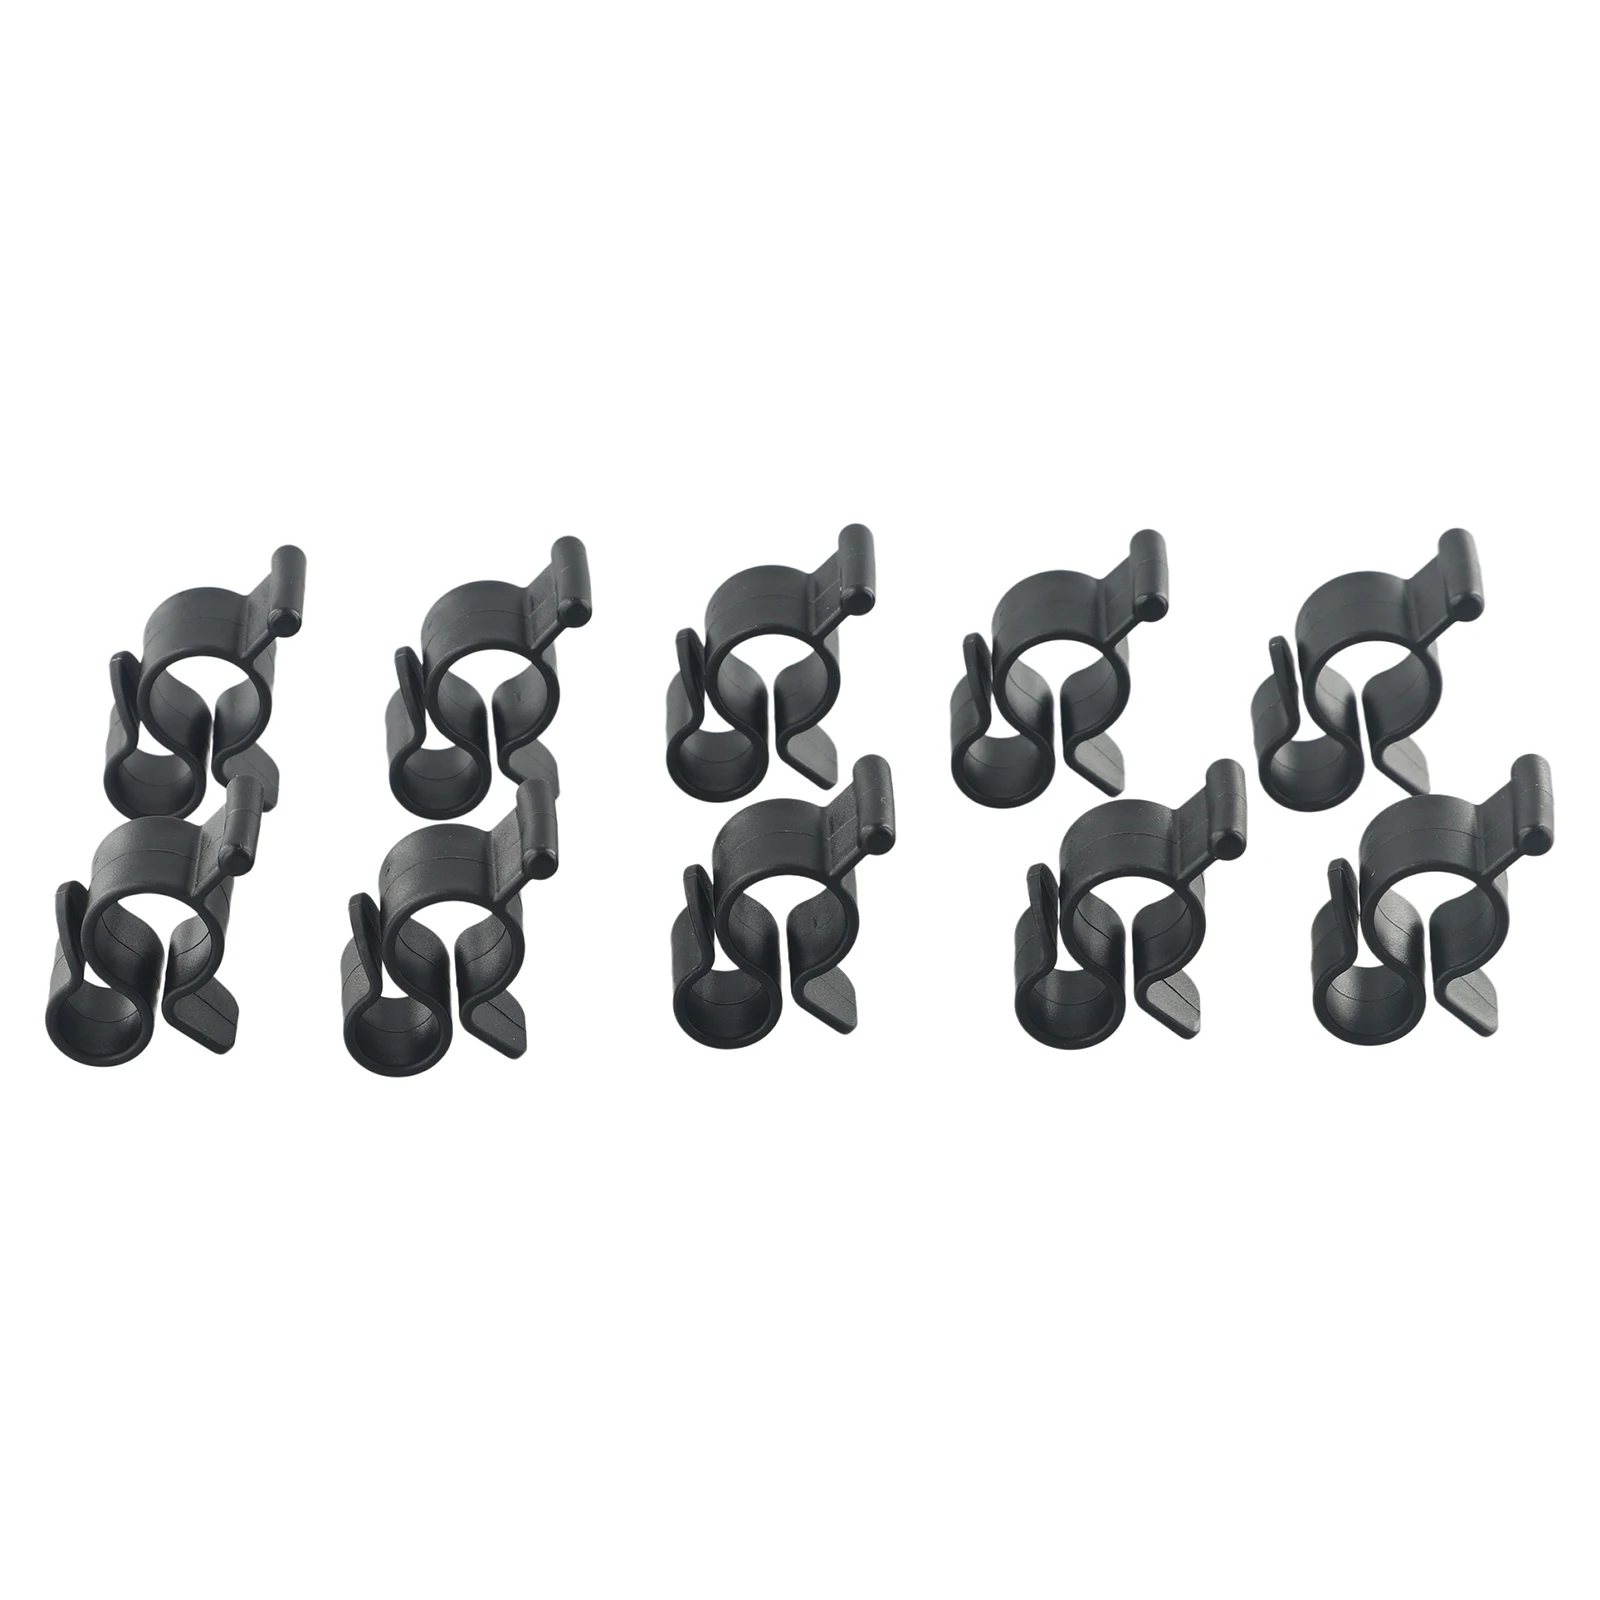 Two Hook Sizes Tent Hooks Hooks Clips 1.57x1.14inch 40x29mm Awning Rope Light Clips Black RV For Caravan Camper 1pcs black silver truck roof cover camper shell mounting clamp heavy duty fixing clip aluminum an10